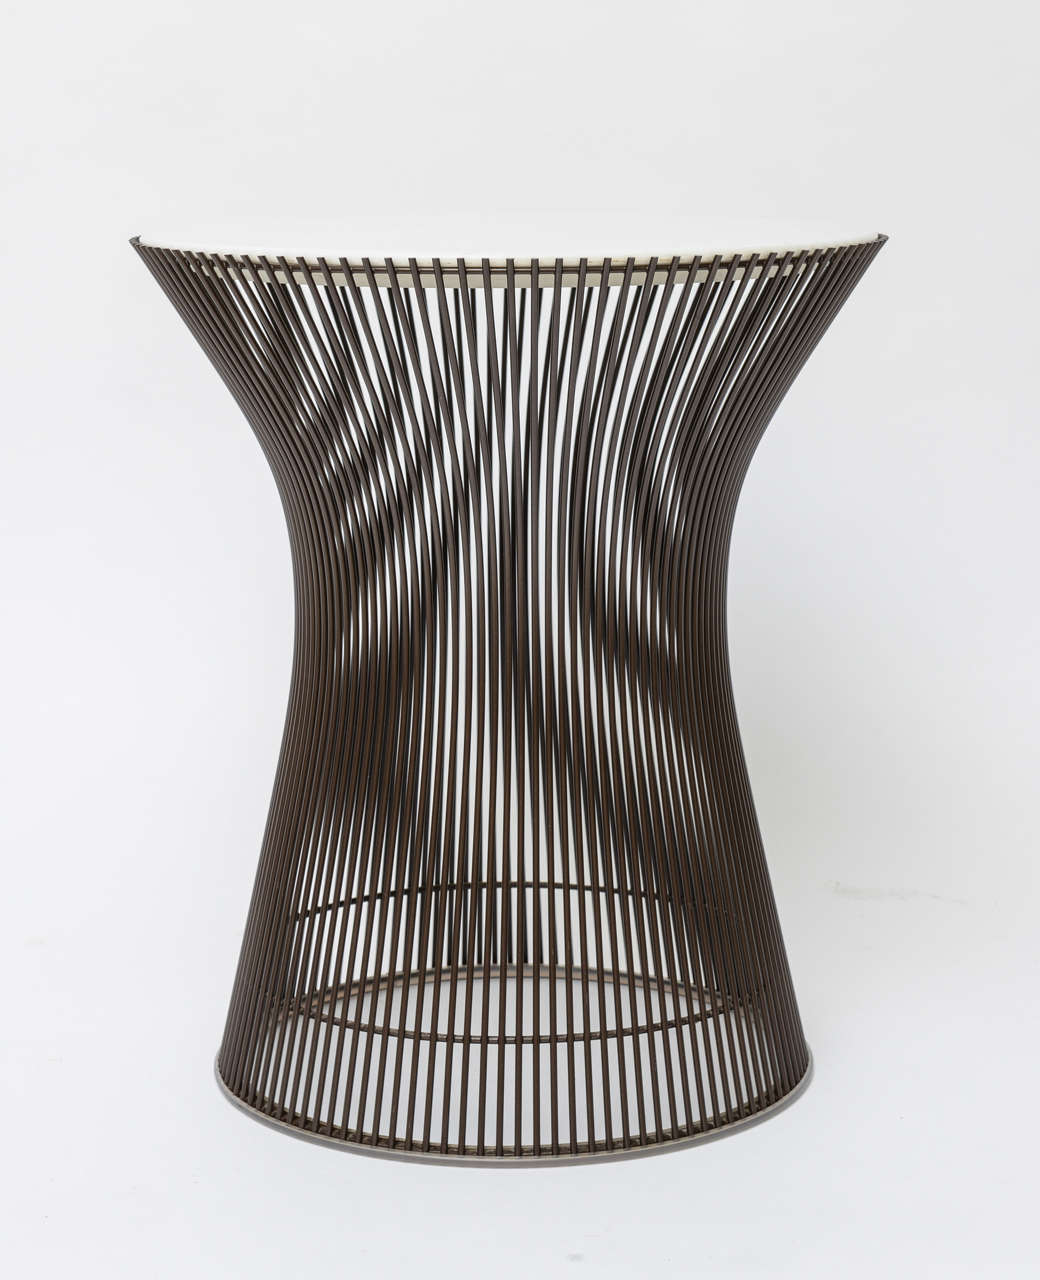 SOLD  SOLD  Iconic 1966 Warren Platner design, this table with white Calacatta inset marble top and beautiful bronze finish base is stunning in its modern simplicity.  The bronze finished steel base is in excellent condition retaining the original